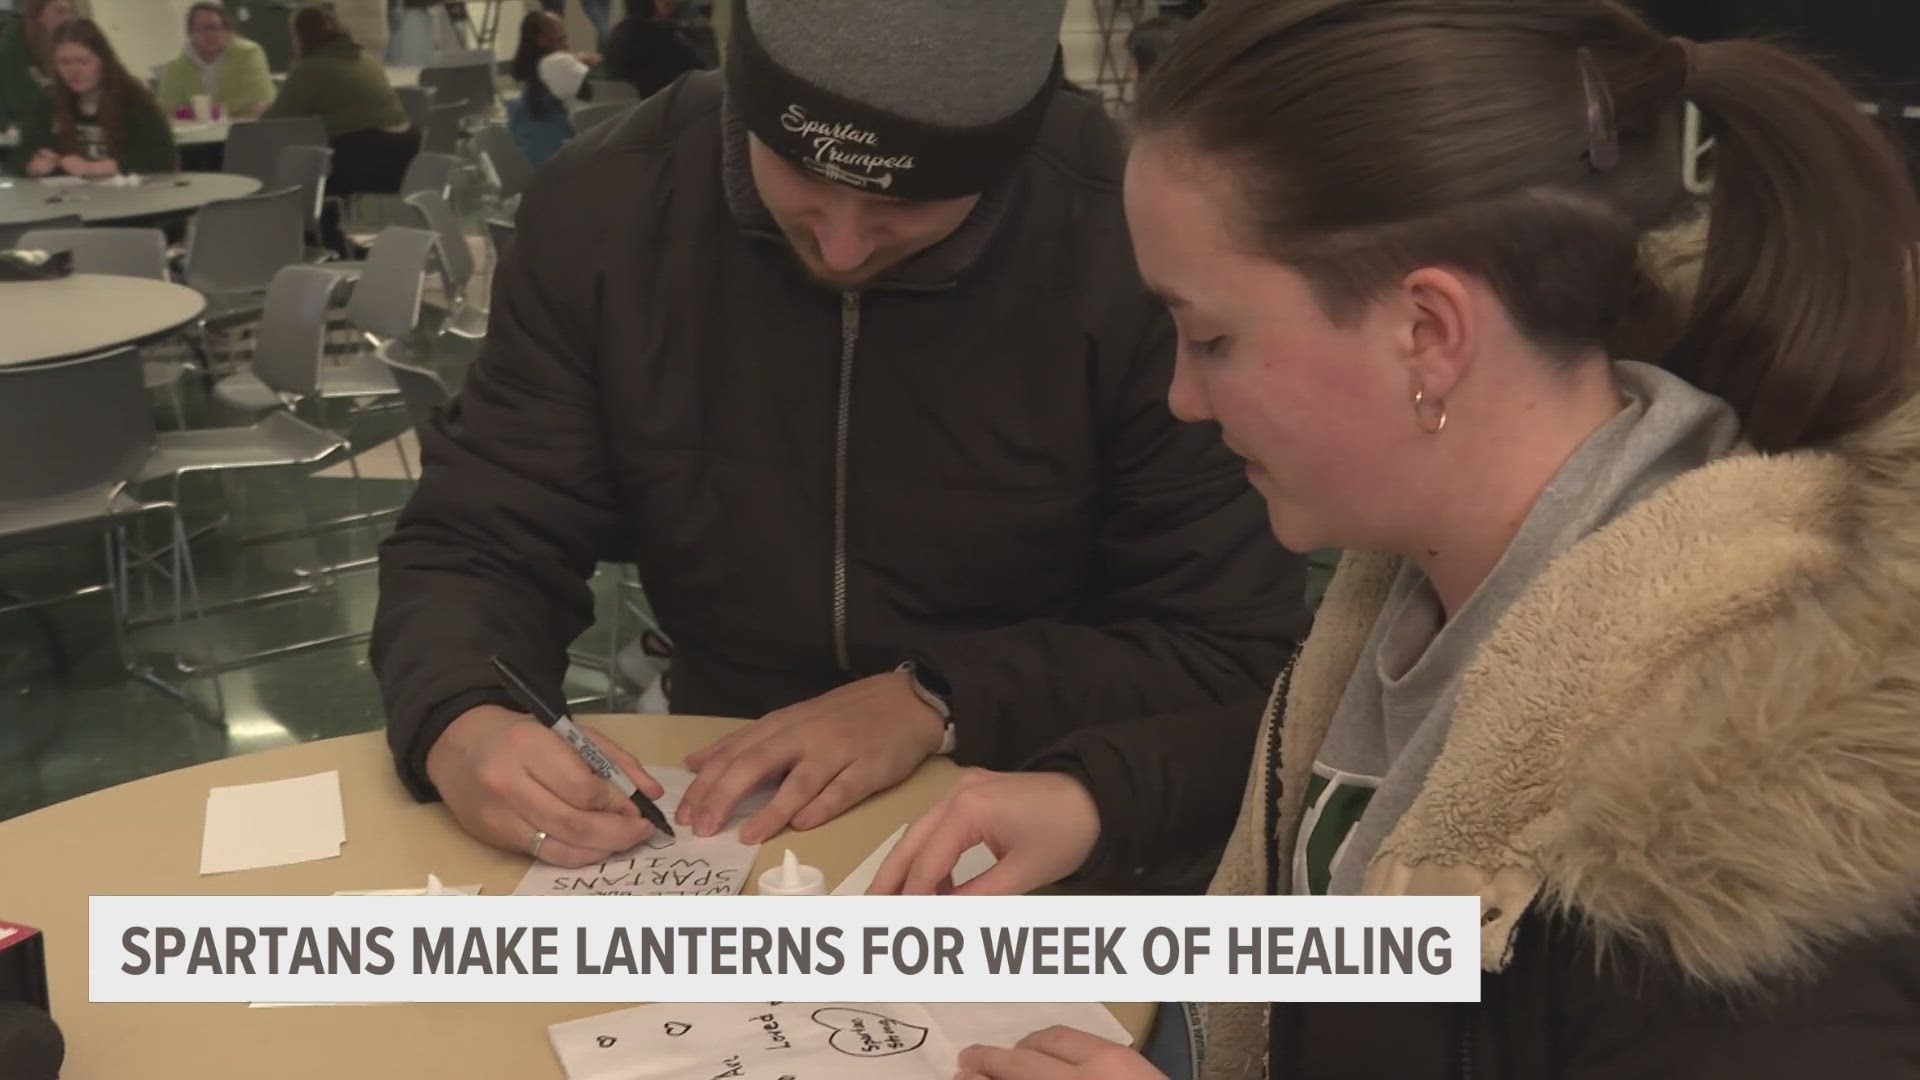 Four organizations are offering a week filled with events that encourage healing and growing. Monday's event decorated luminaries to be lit by Spartans old and new.